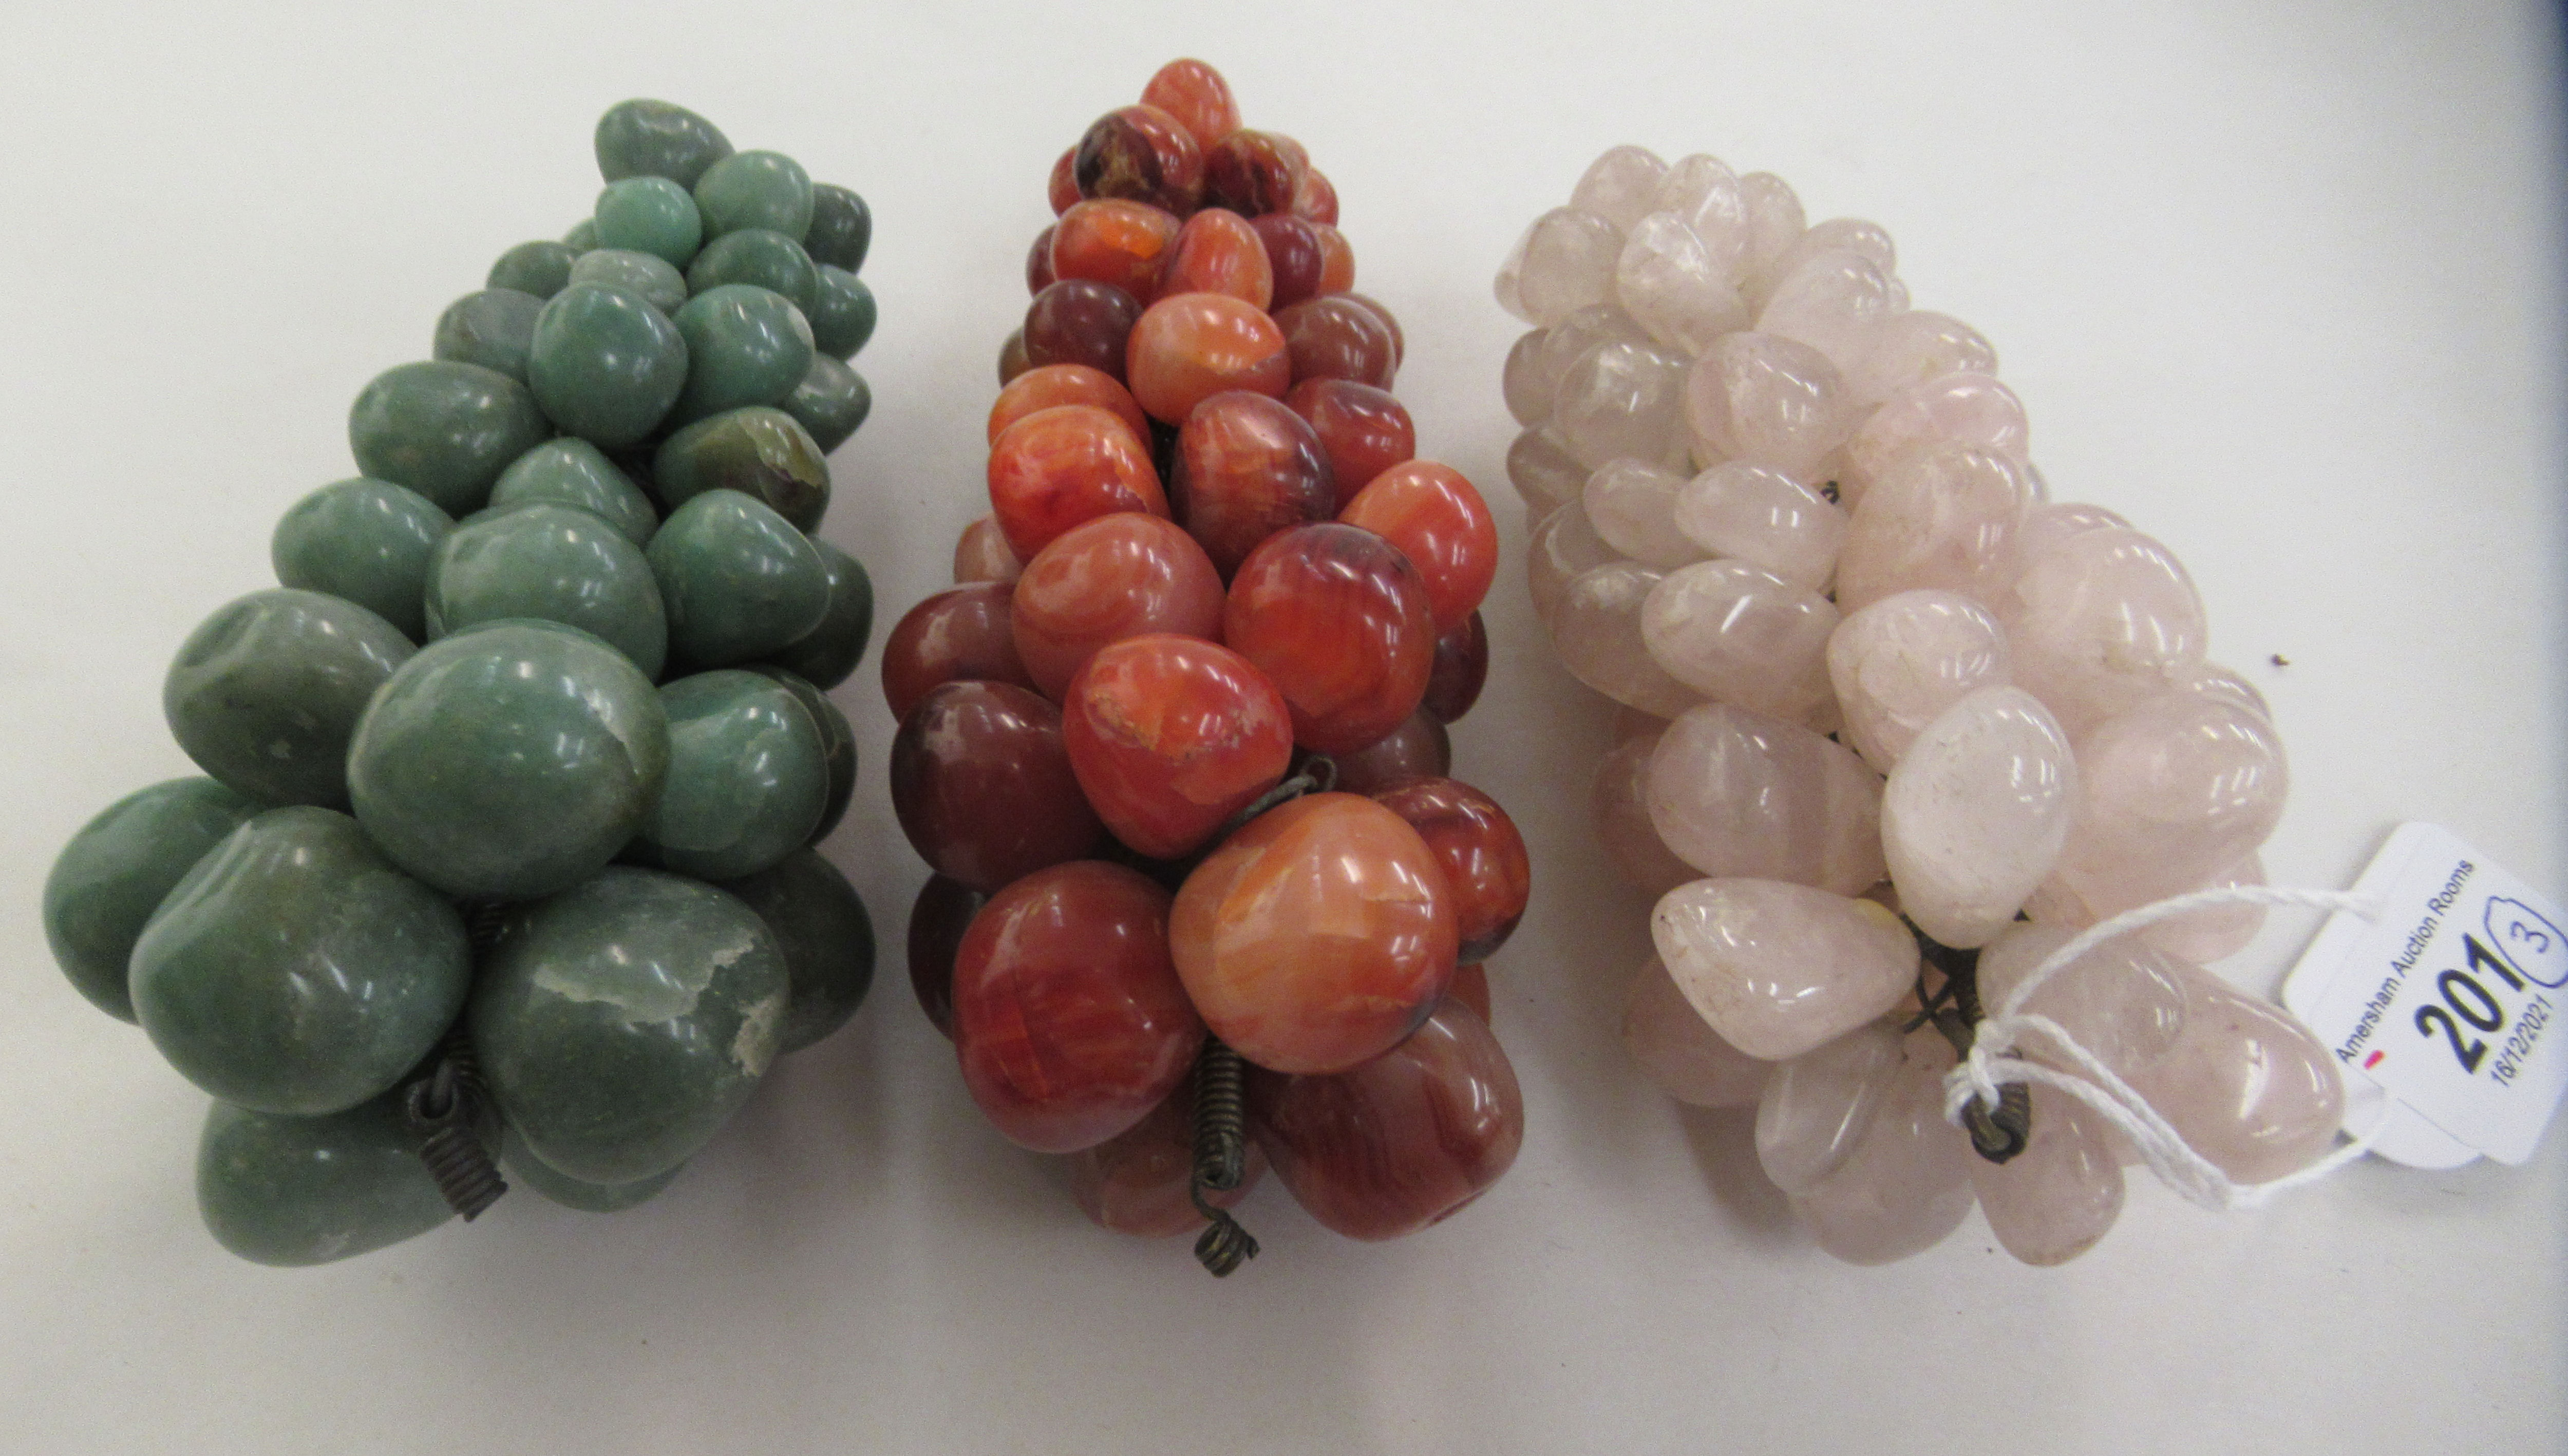 Three coloured hardstone ornaments, each fashioned as a bunch of grapes  6" - 8"h - Image 3 of 4